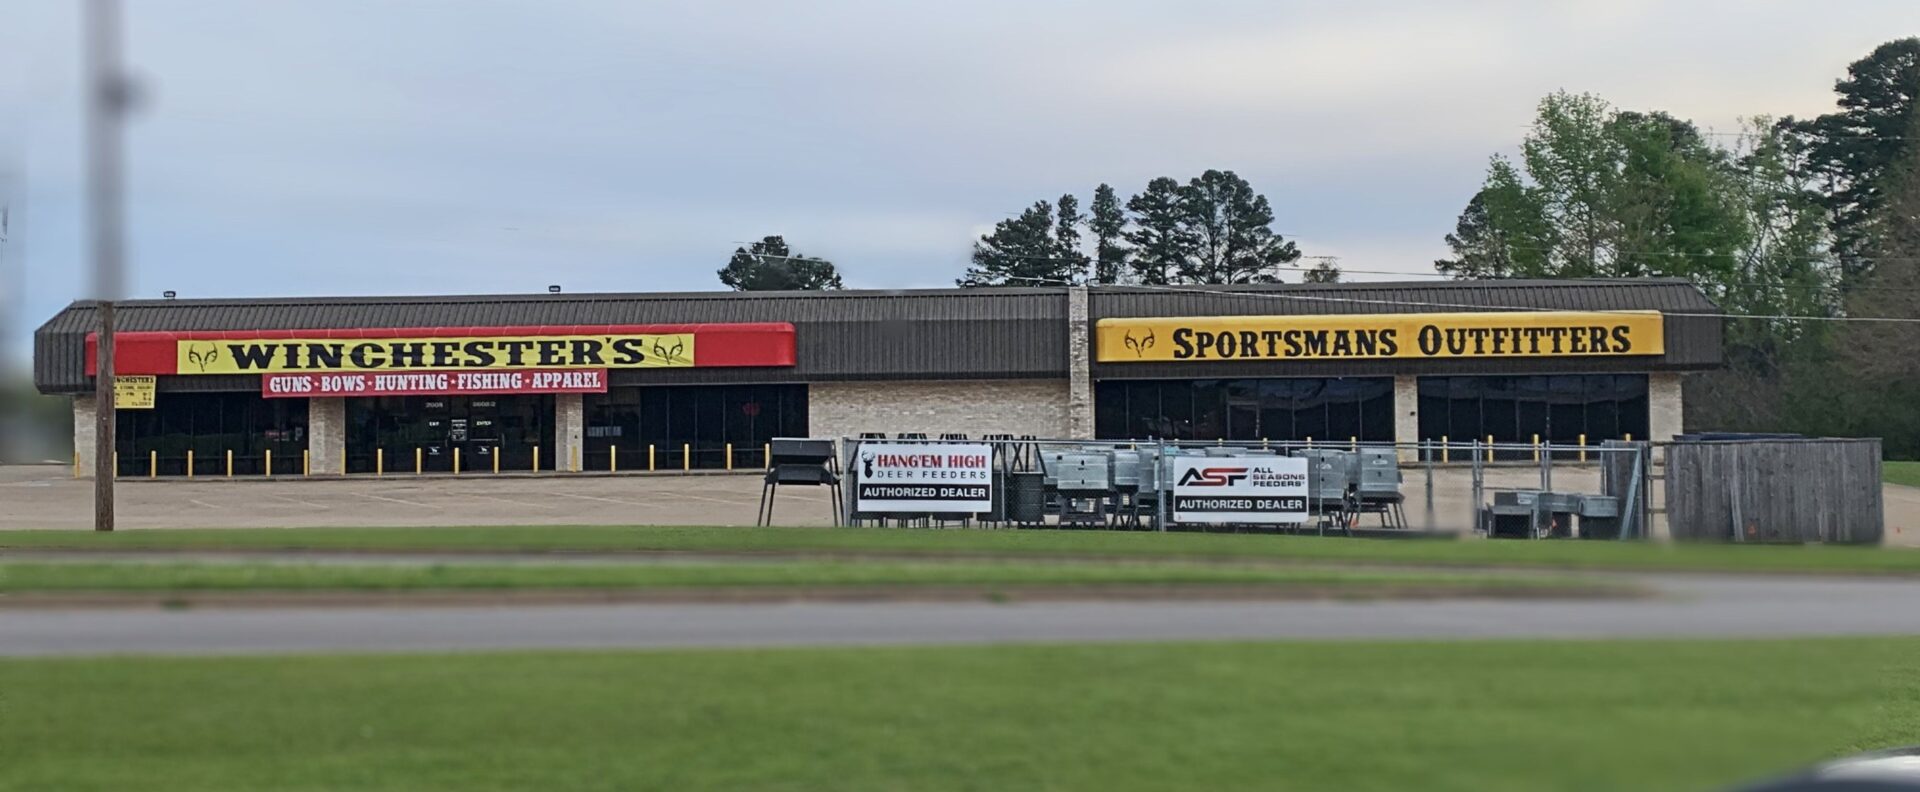 Fishing, Hunting and Outdoor Superstore - Sportsman's Outfitters